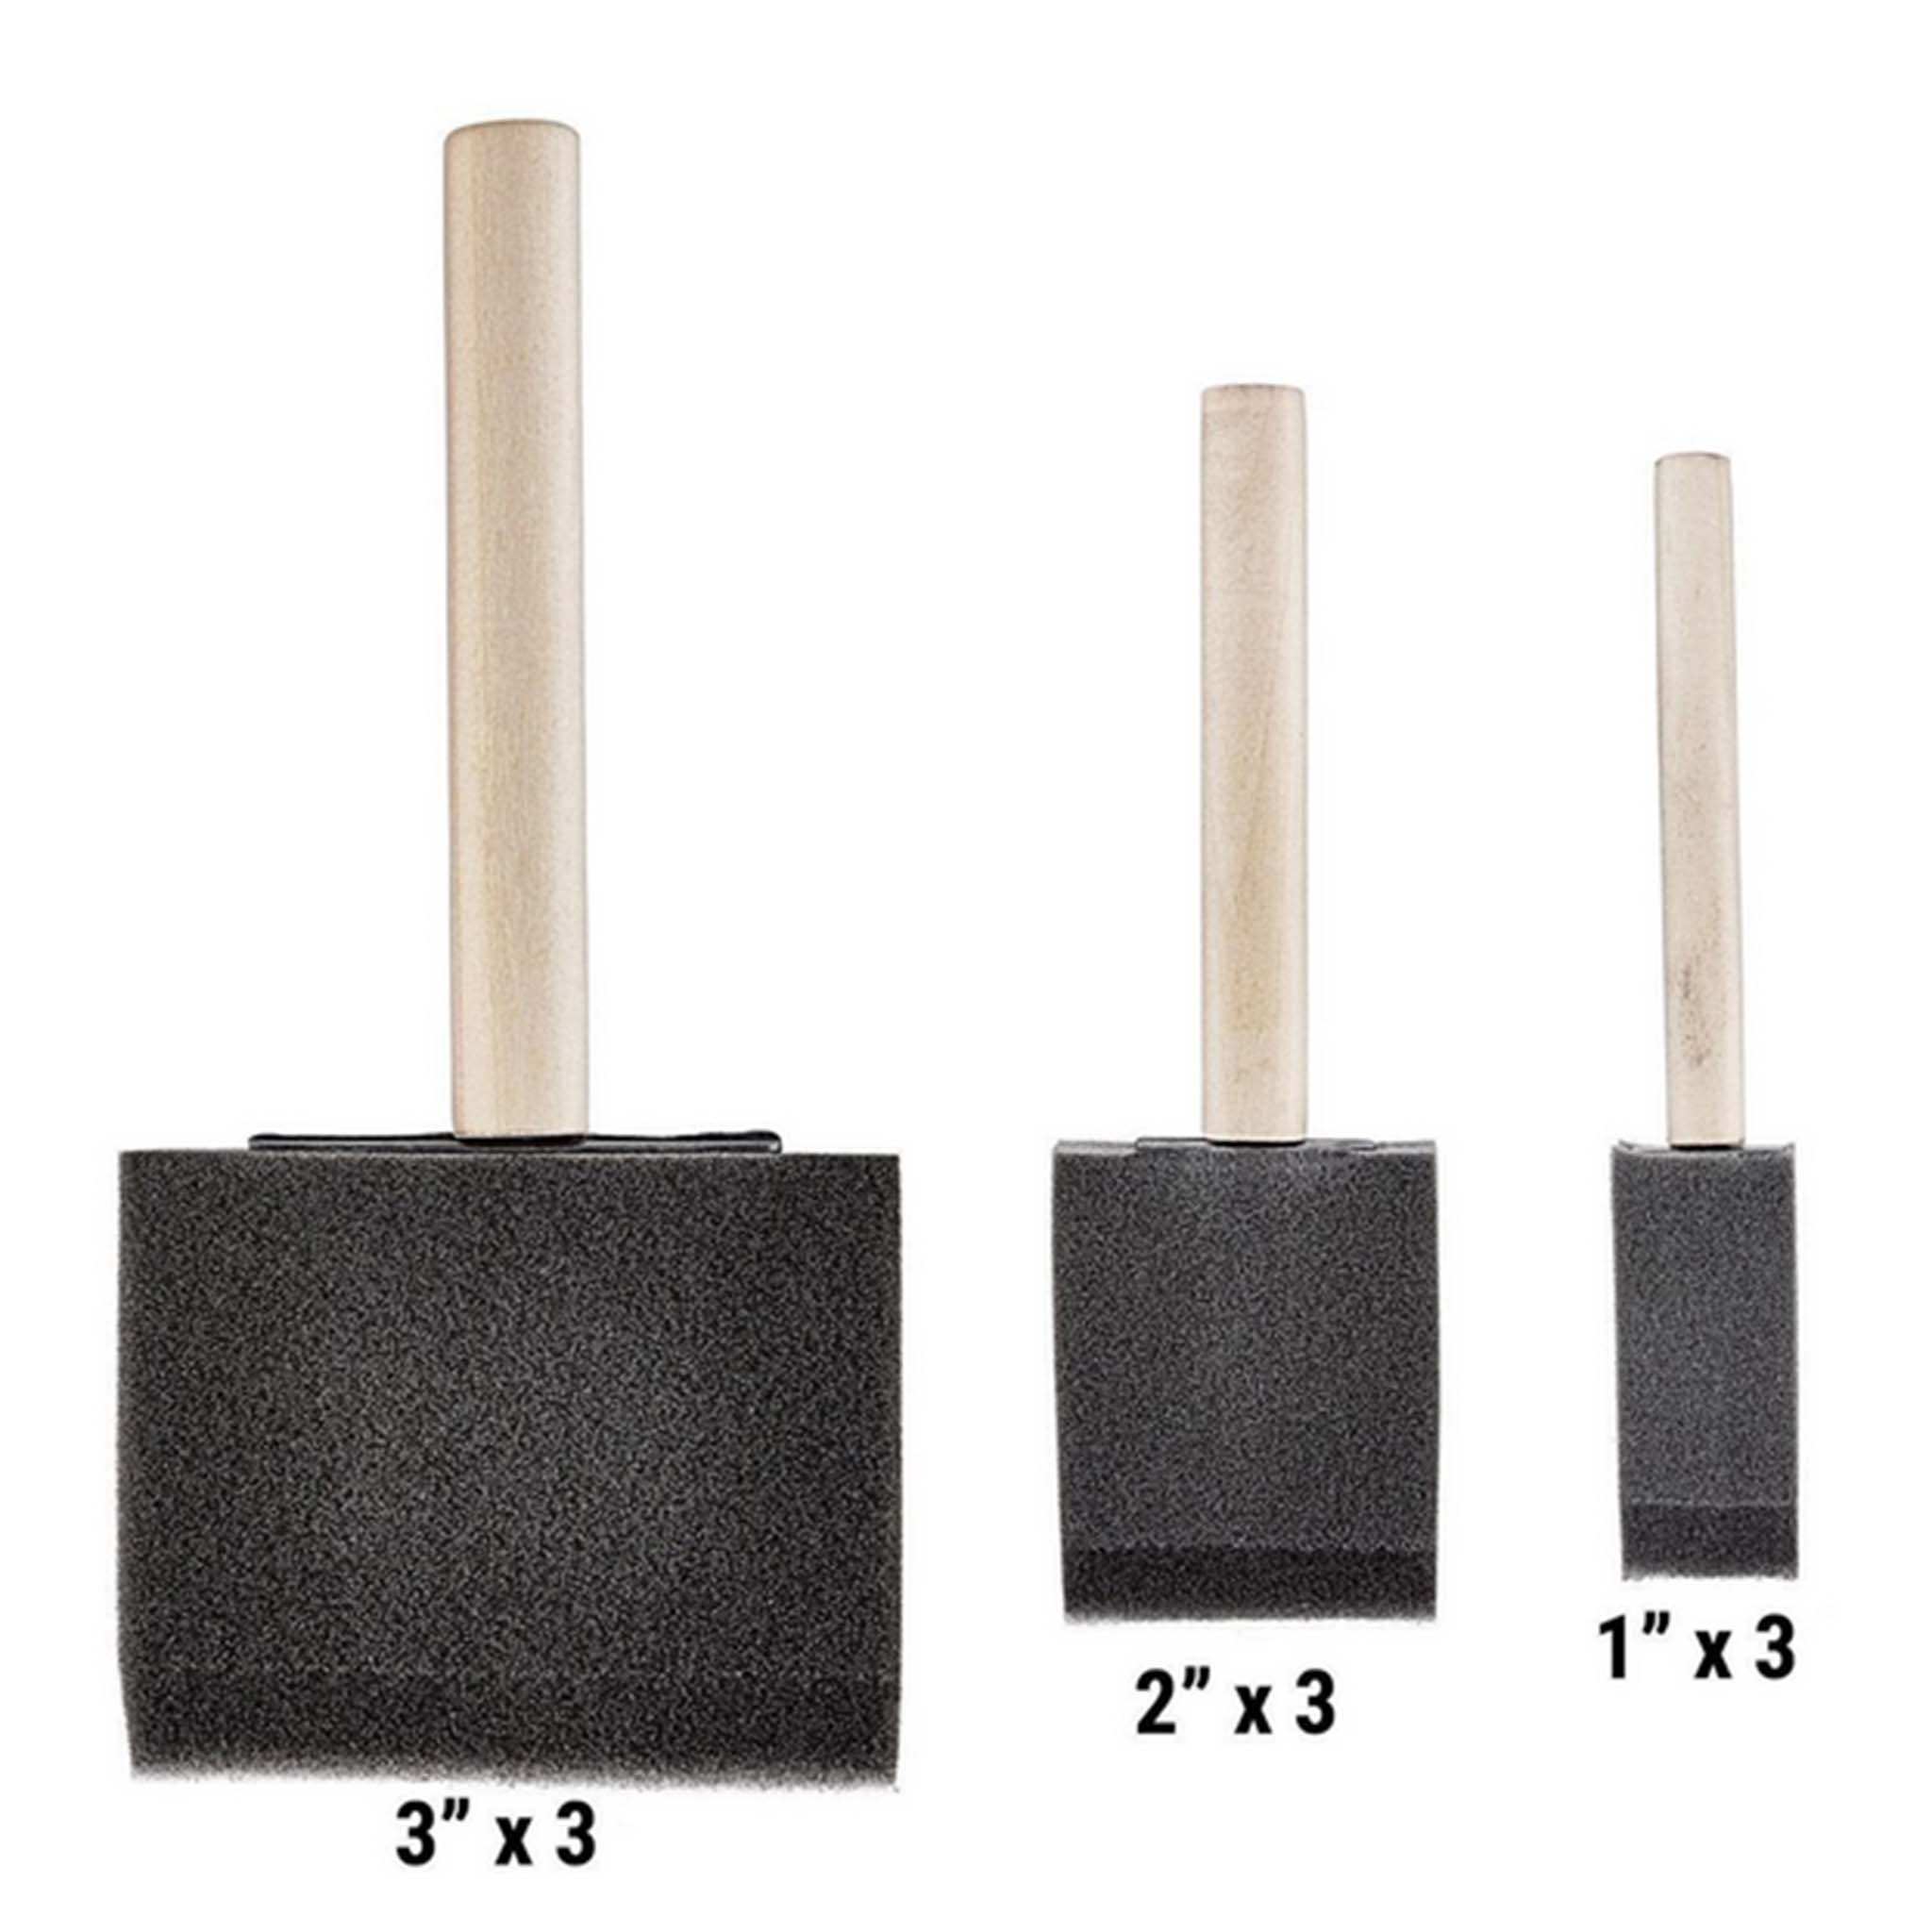 Three foam paint brushes. 3"x3", 2"x3", and 1"x3".